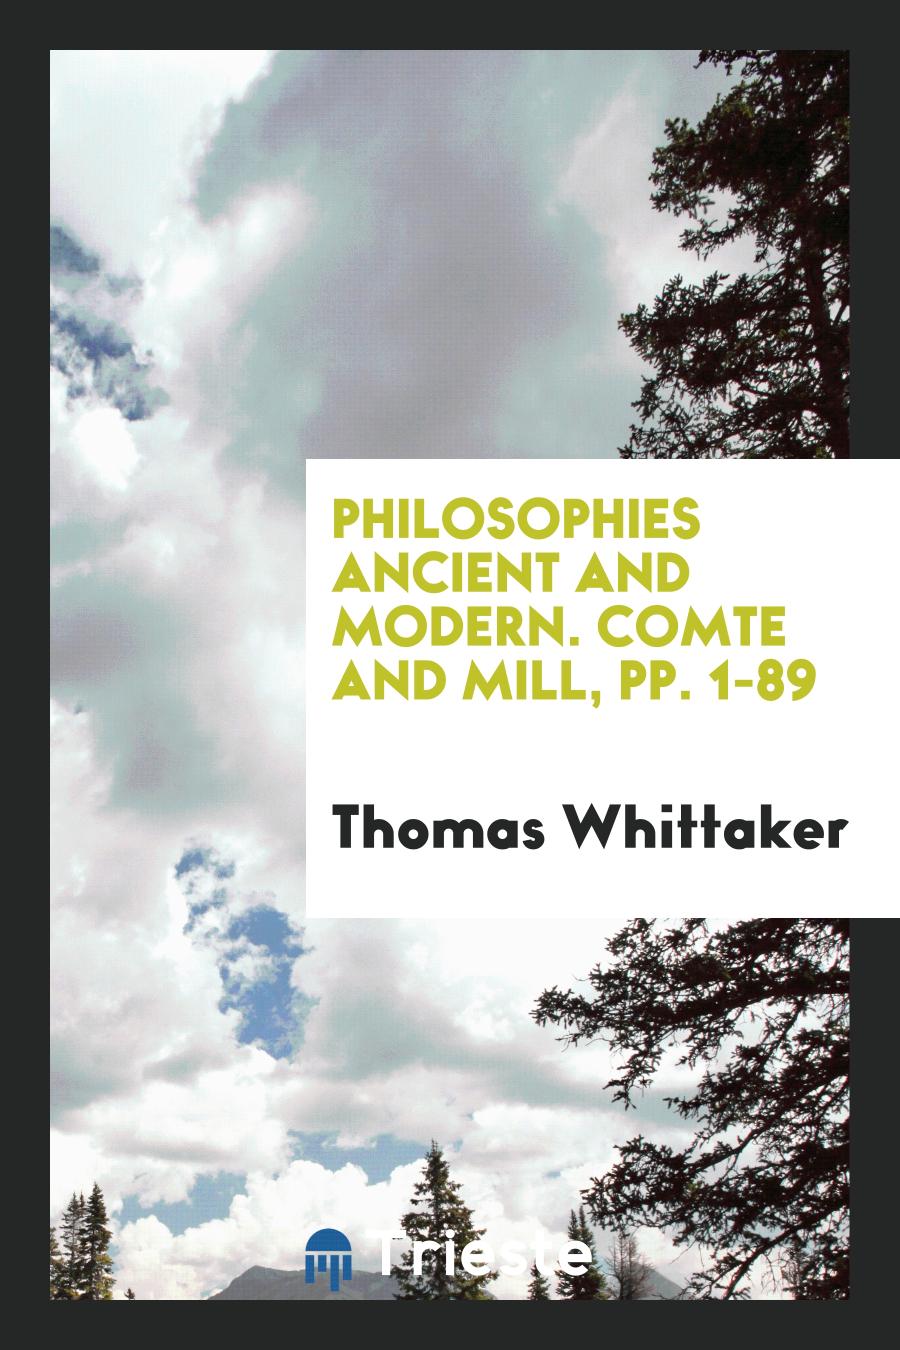 Philosophies Ancient and Modern. Comte and Mill, pp. 1-89